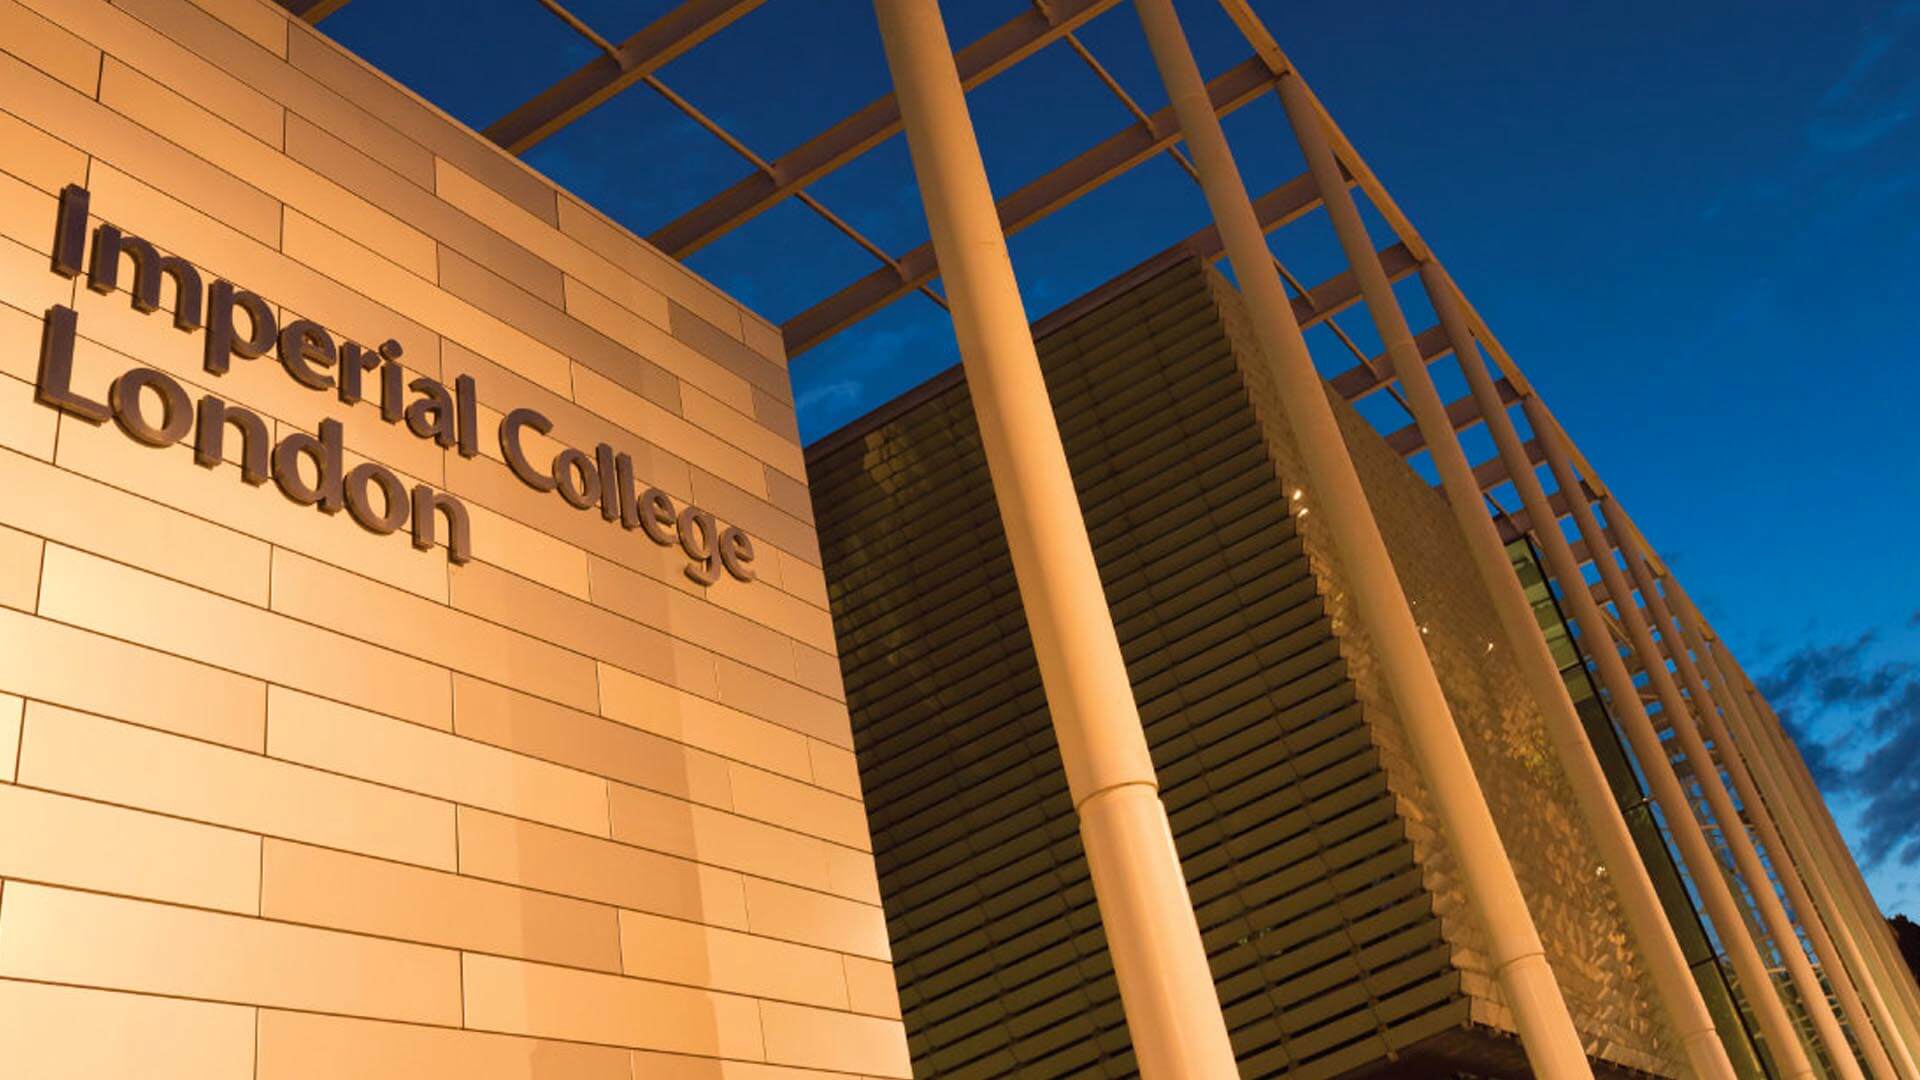 Imperial College London: Student Life and Study Experience